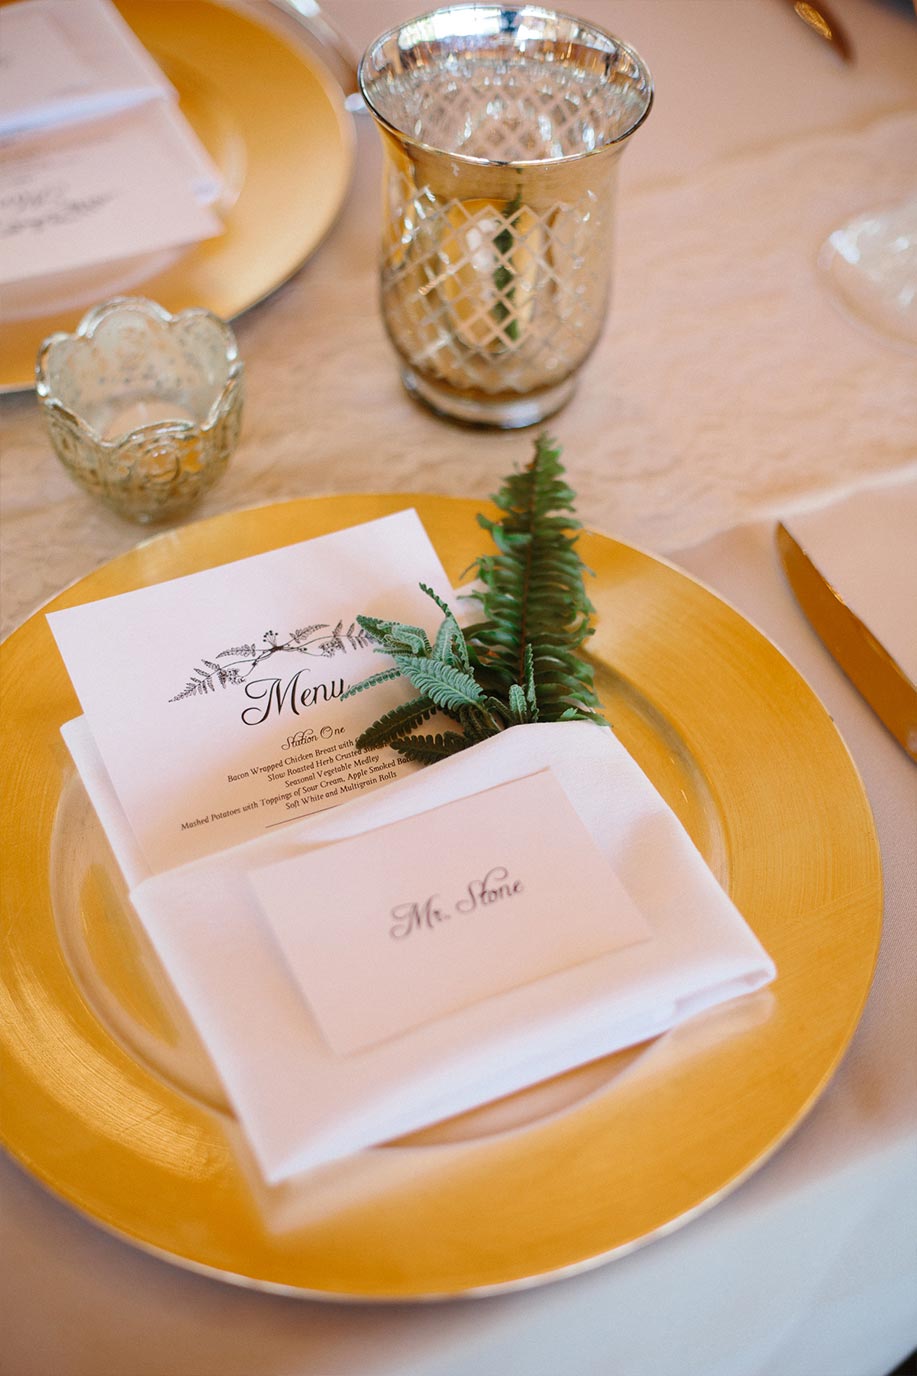 Menu card place setting with greenery, fern leaf, and yellow plate